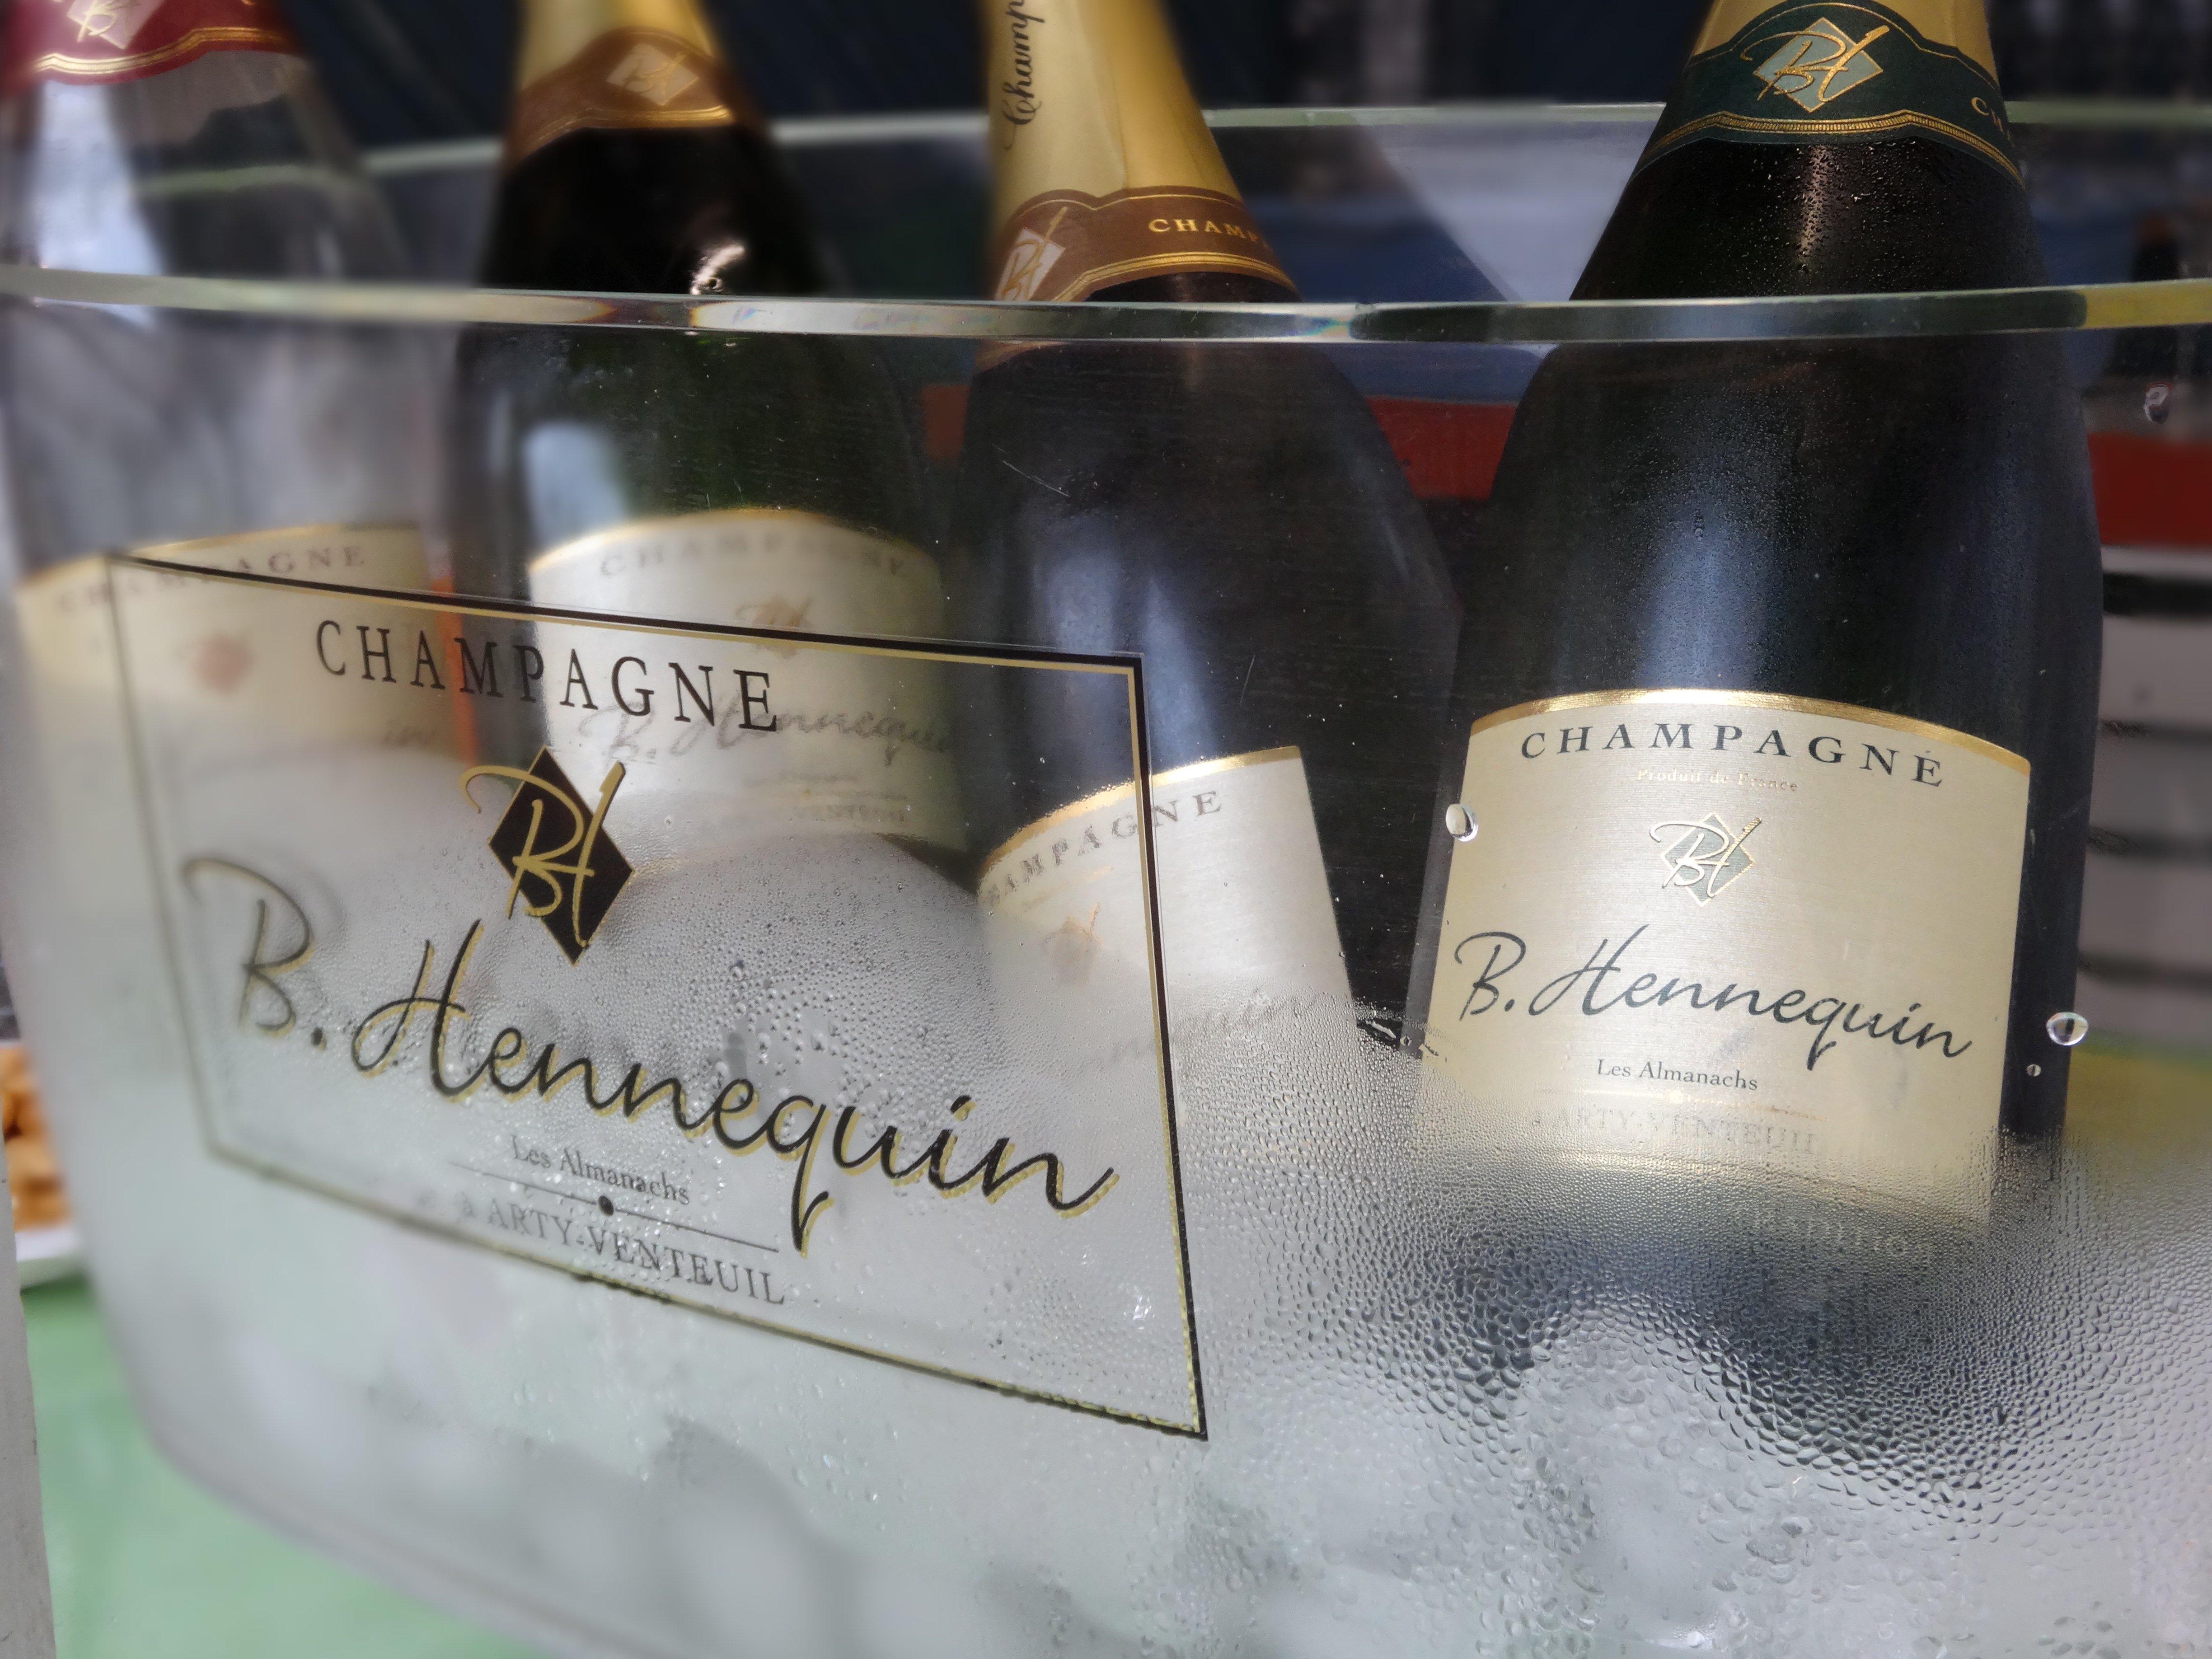 Champagne Hennequin